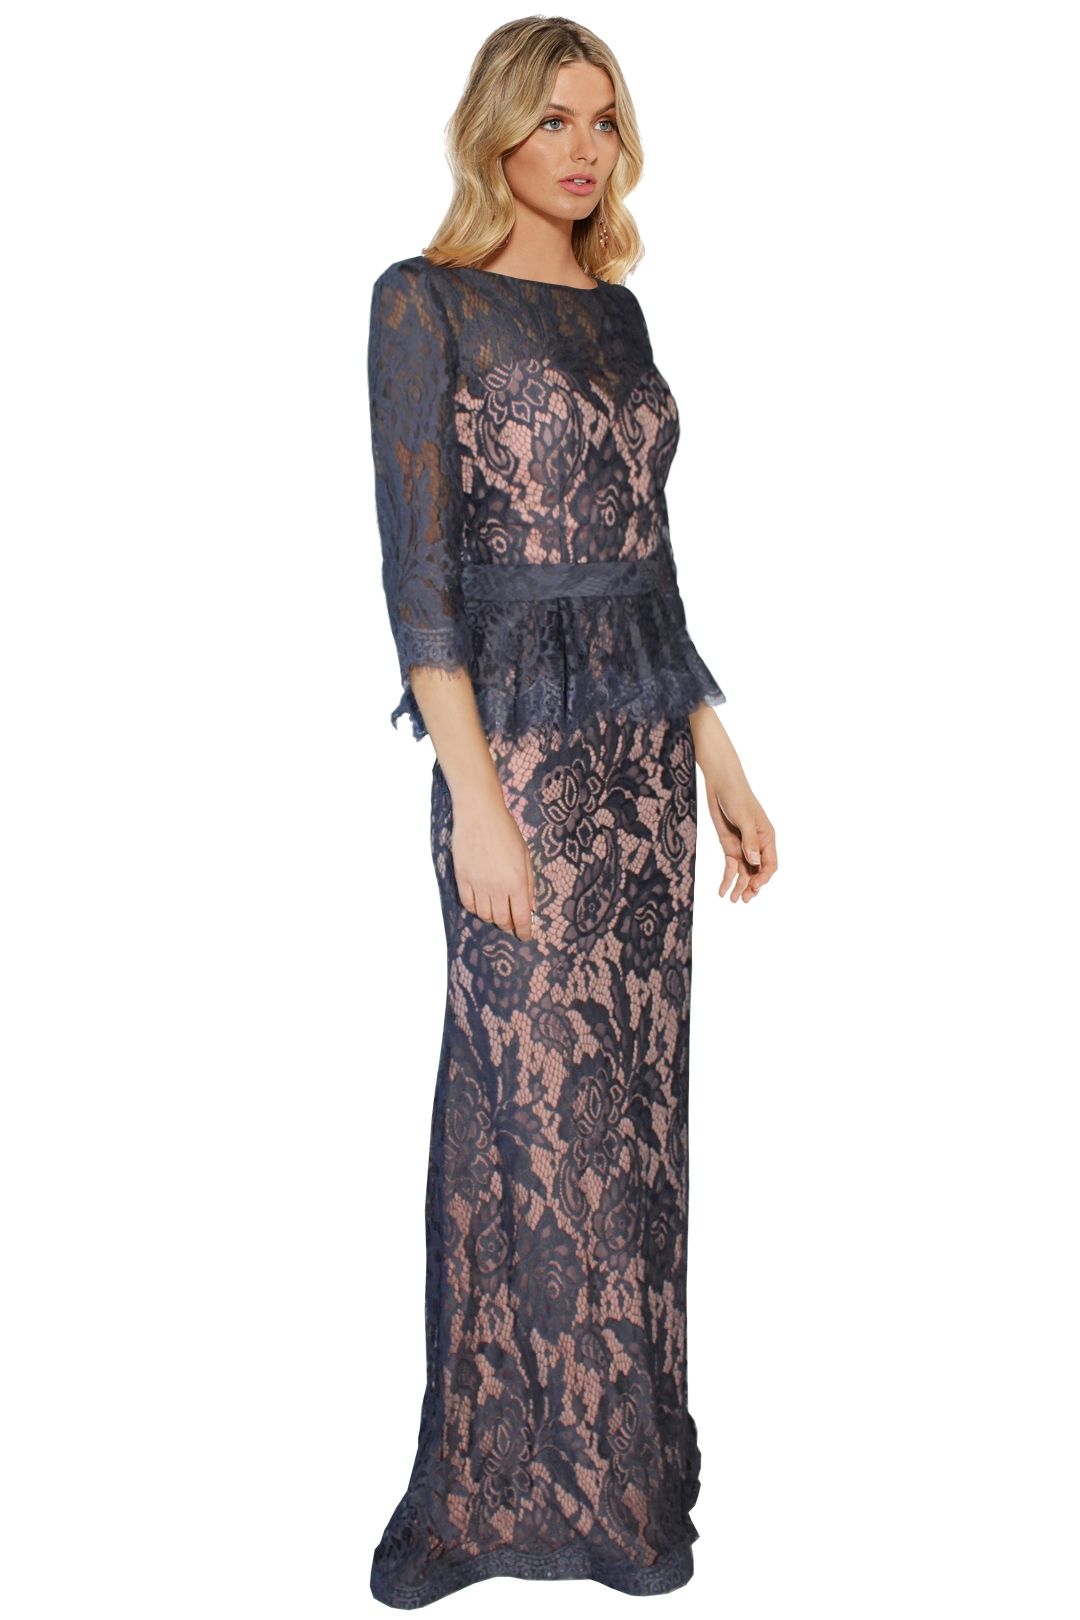 Jadore - Tessa Lace Gown - Grey Lace - Side